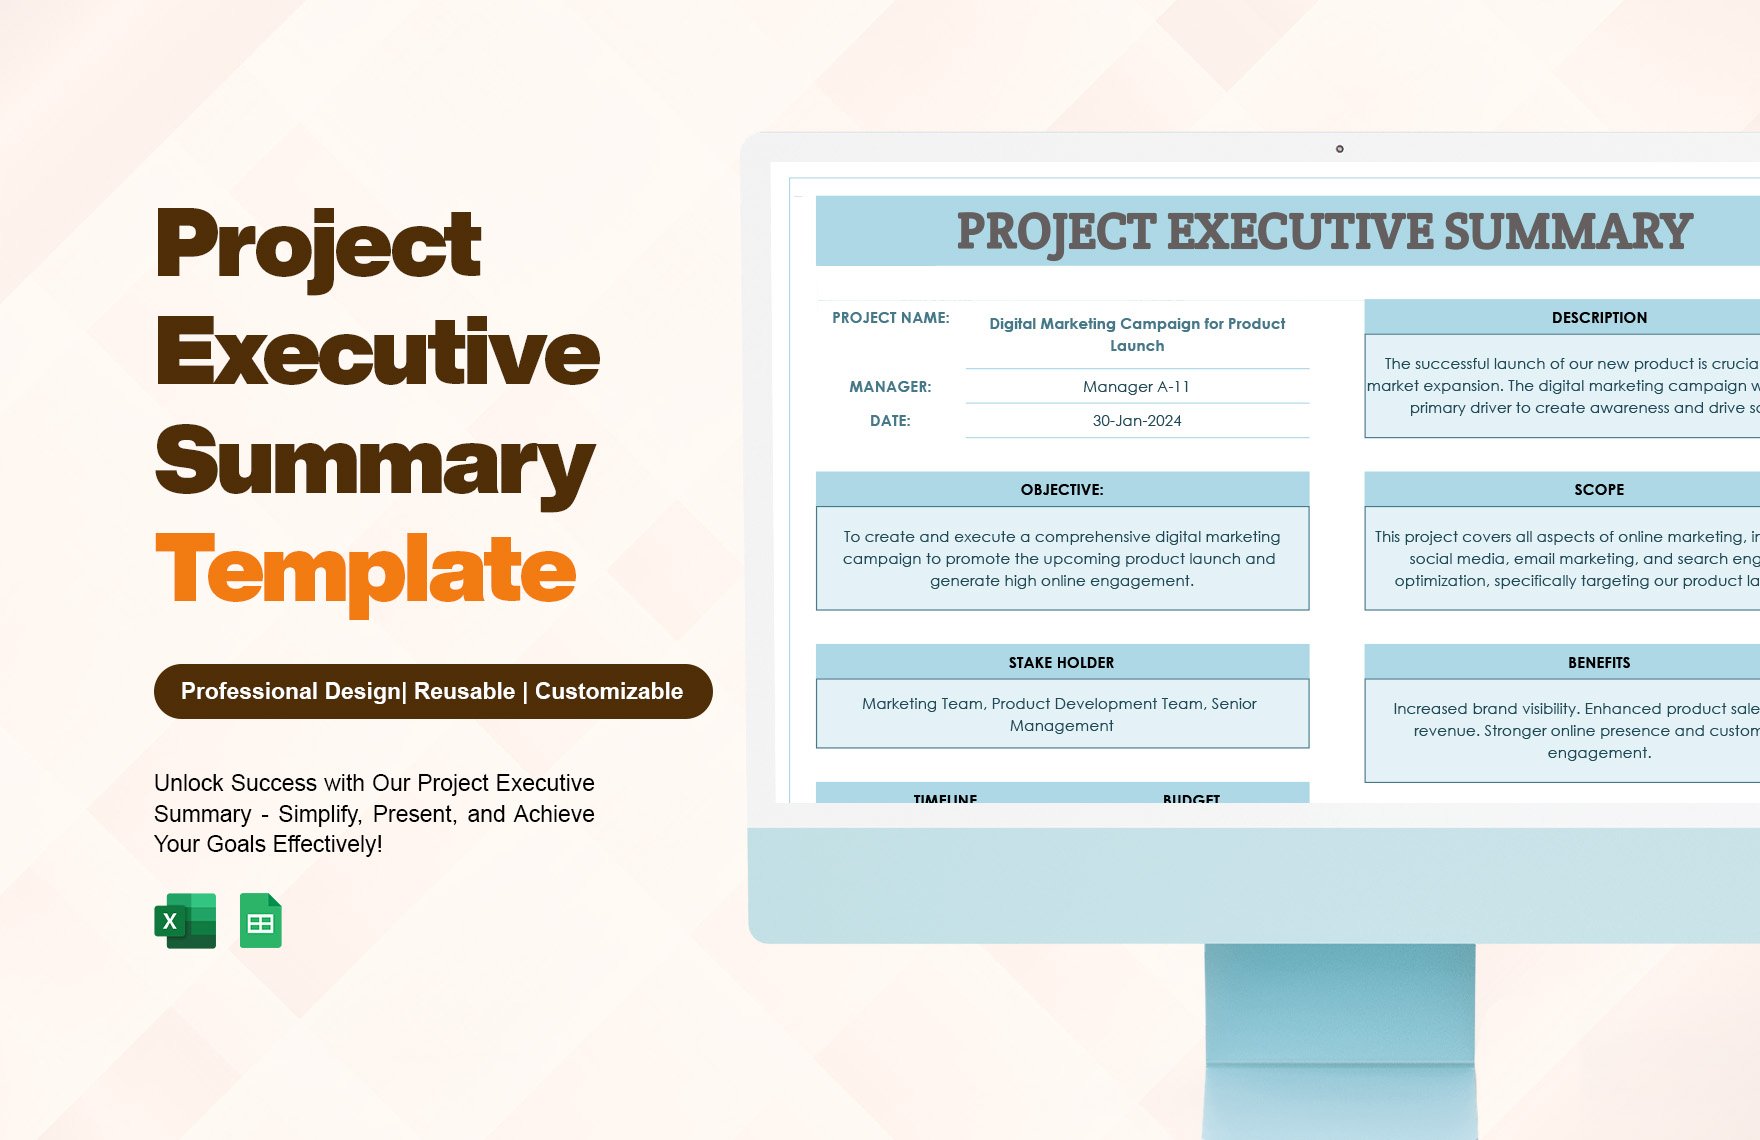 Project Executive Summary Template